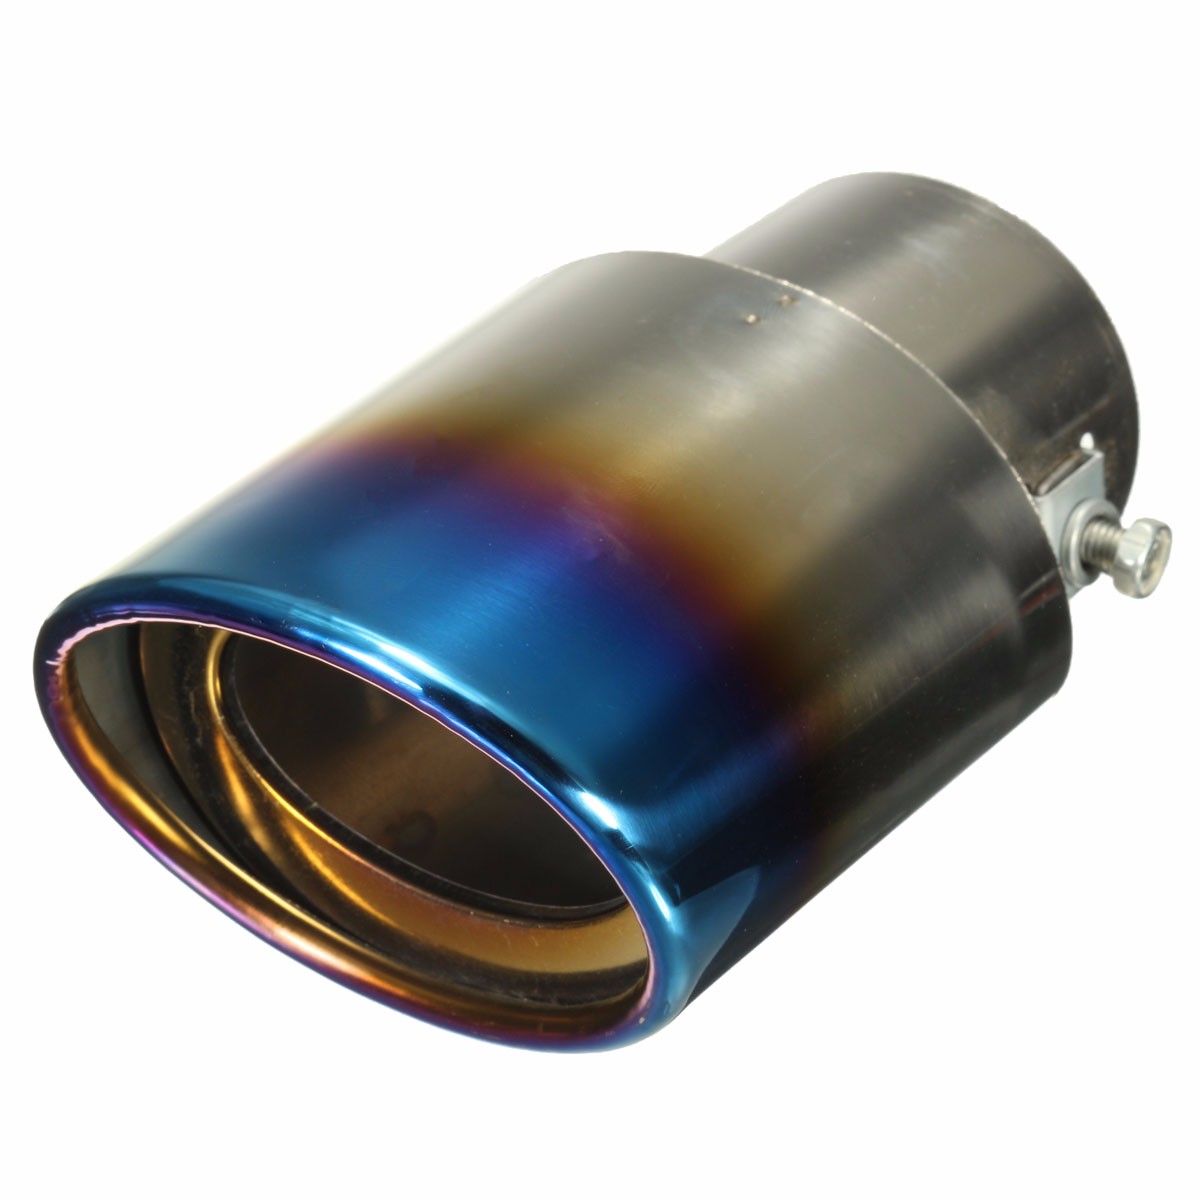 1Pcs-Universal-Car-Auto-Stainless-Steel-Exhaust-Muffler-Tailpipe-Modification-1063532